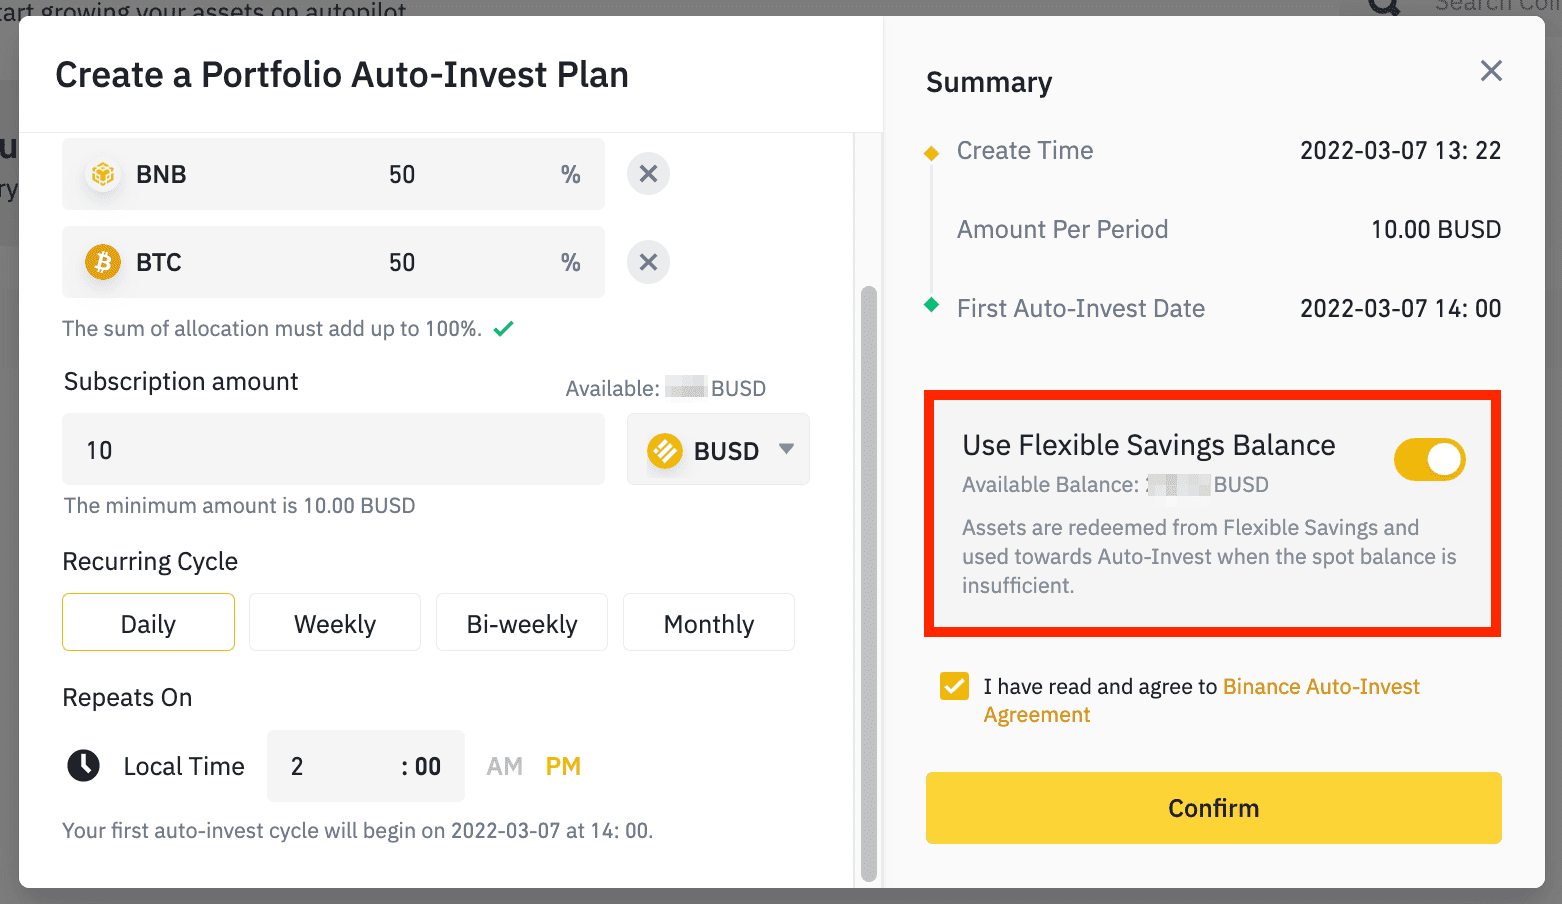 The dashboard shows all created auto-invest plan